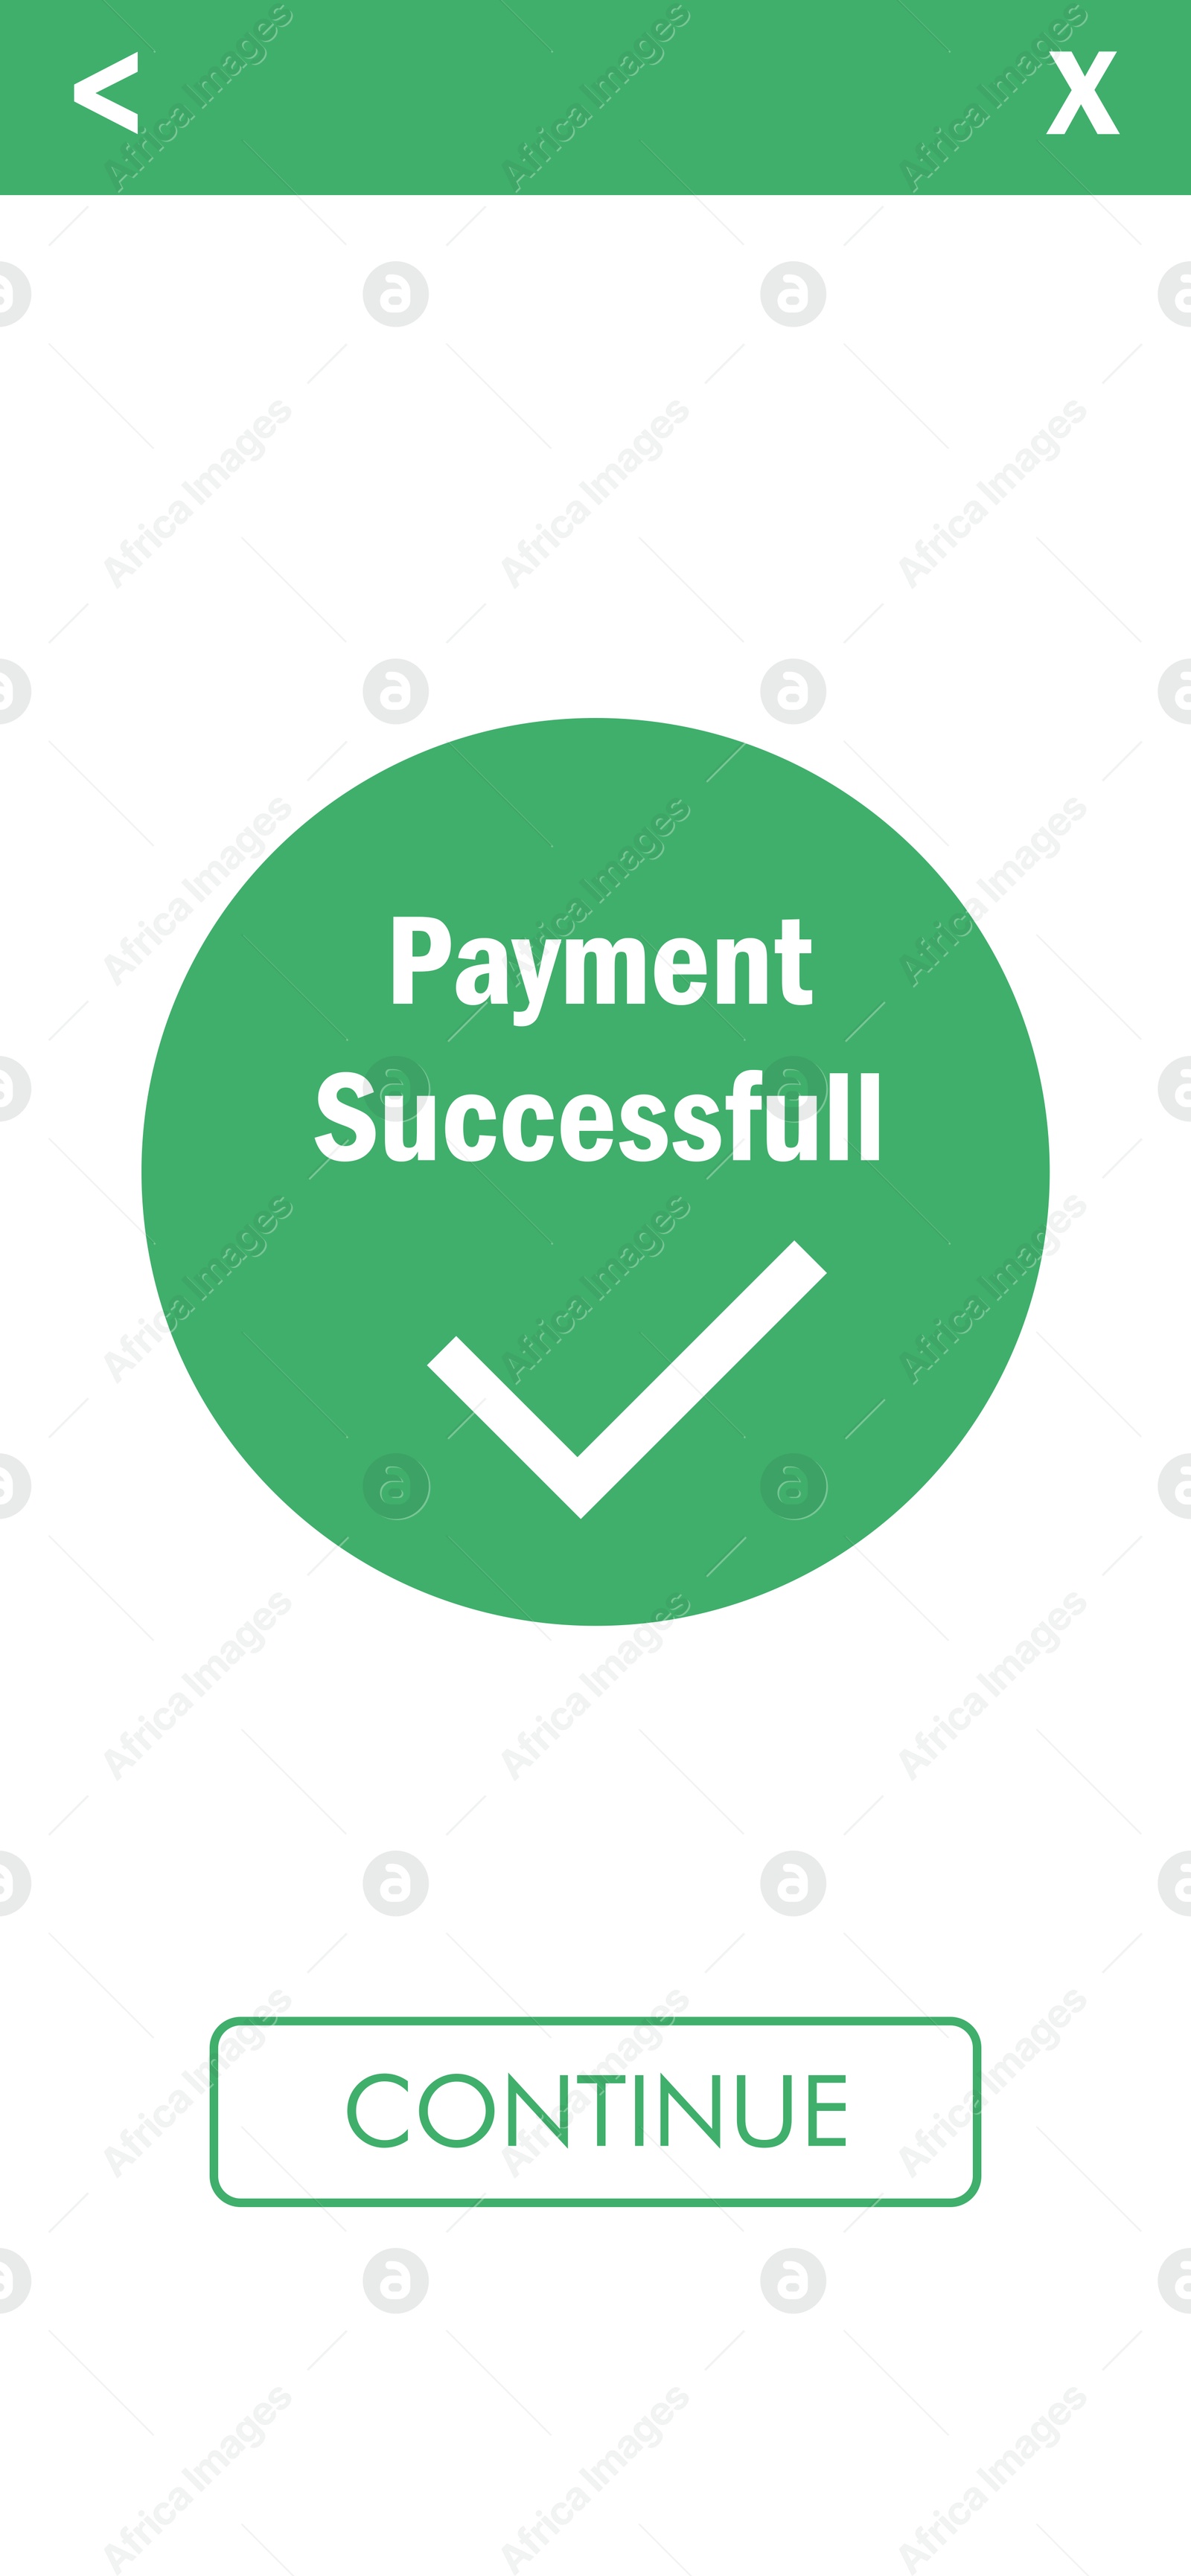 Image of Online payment application screen showing successful transaction on white background, illustration